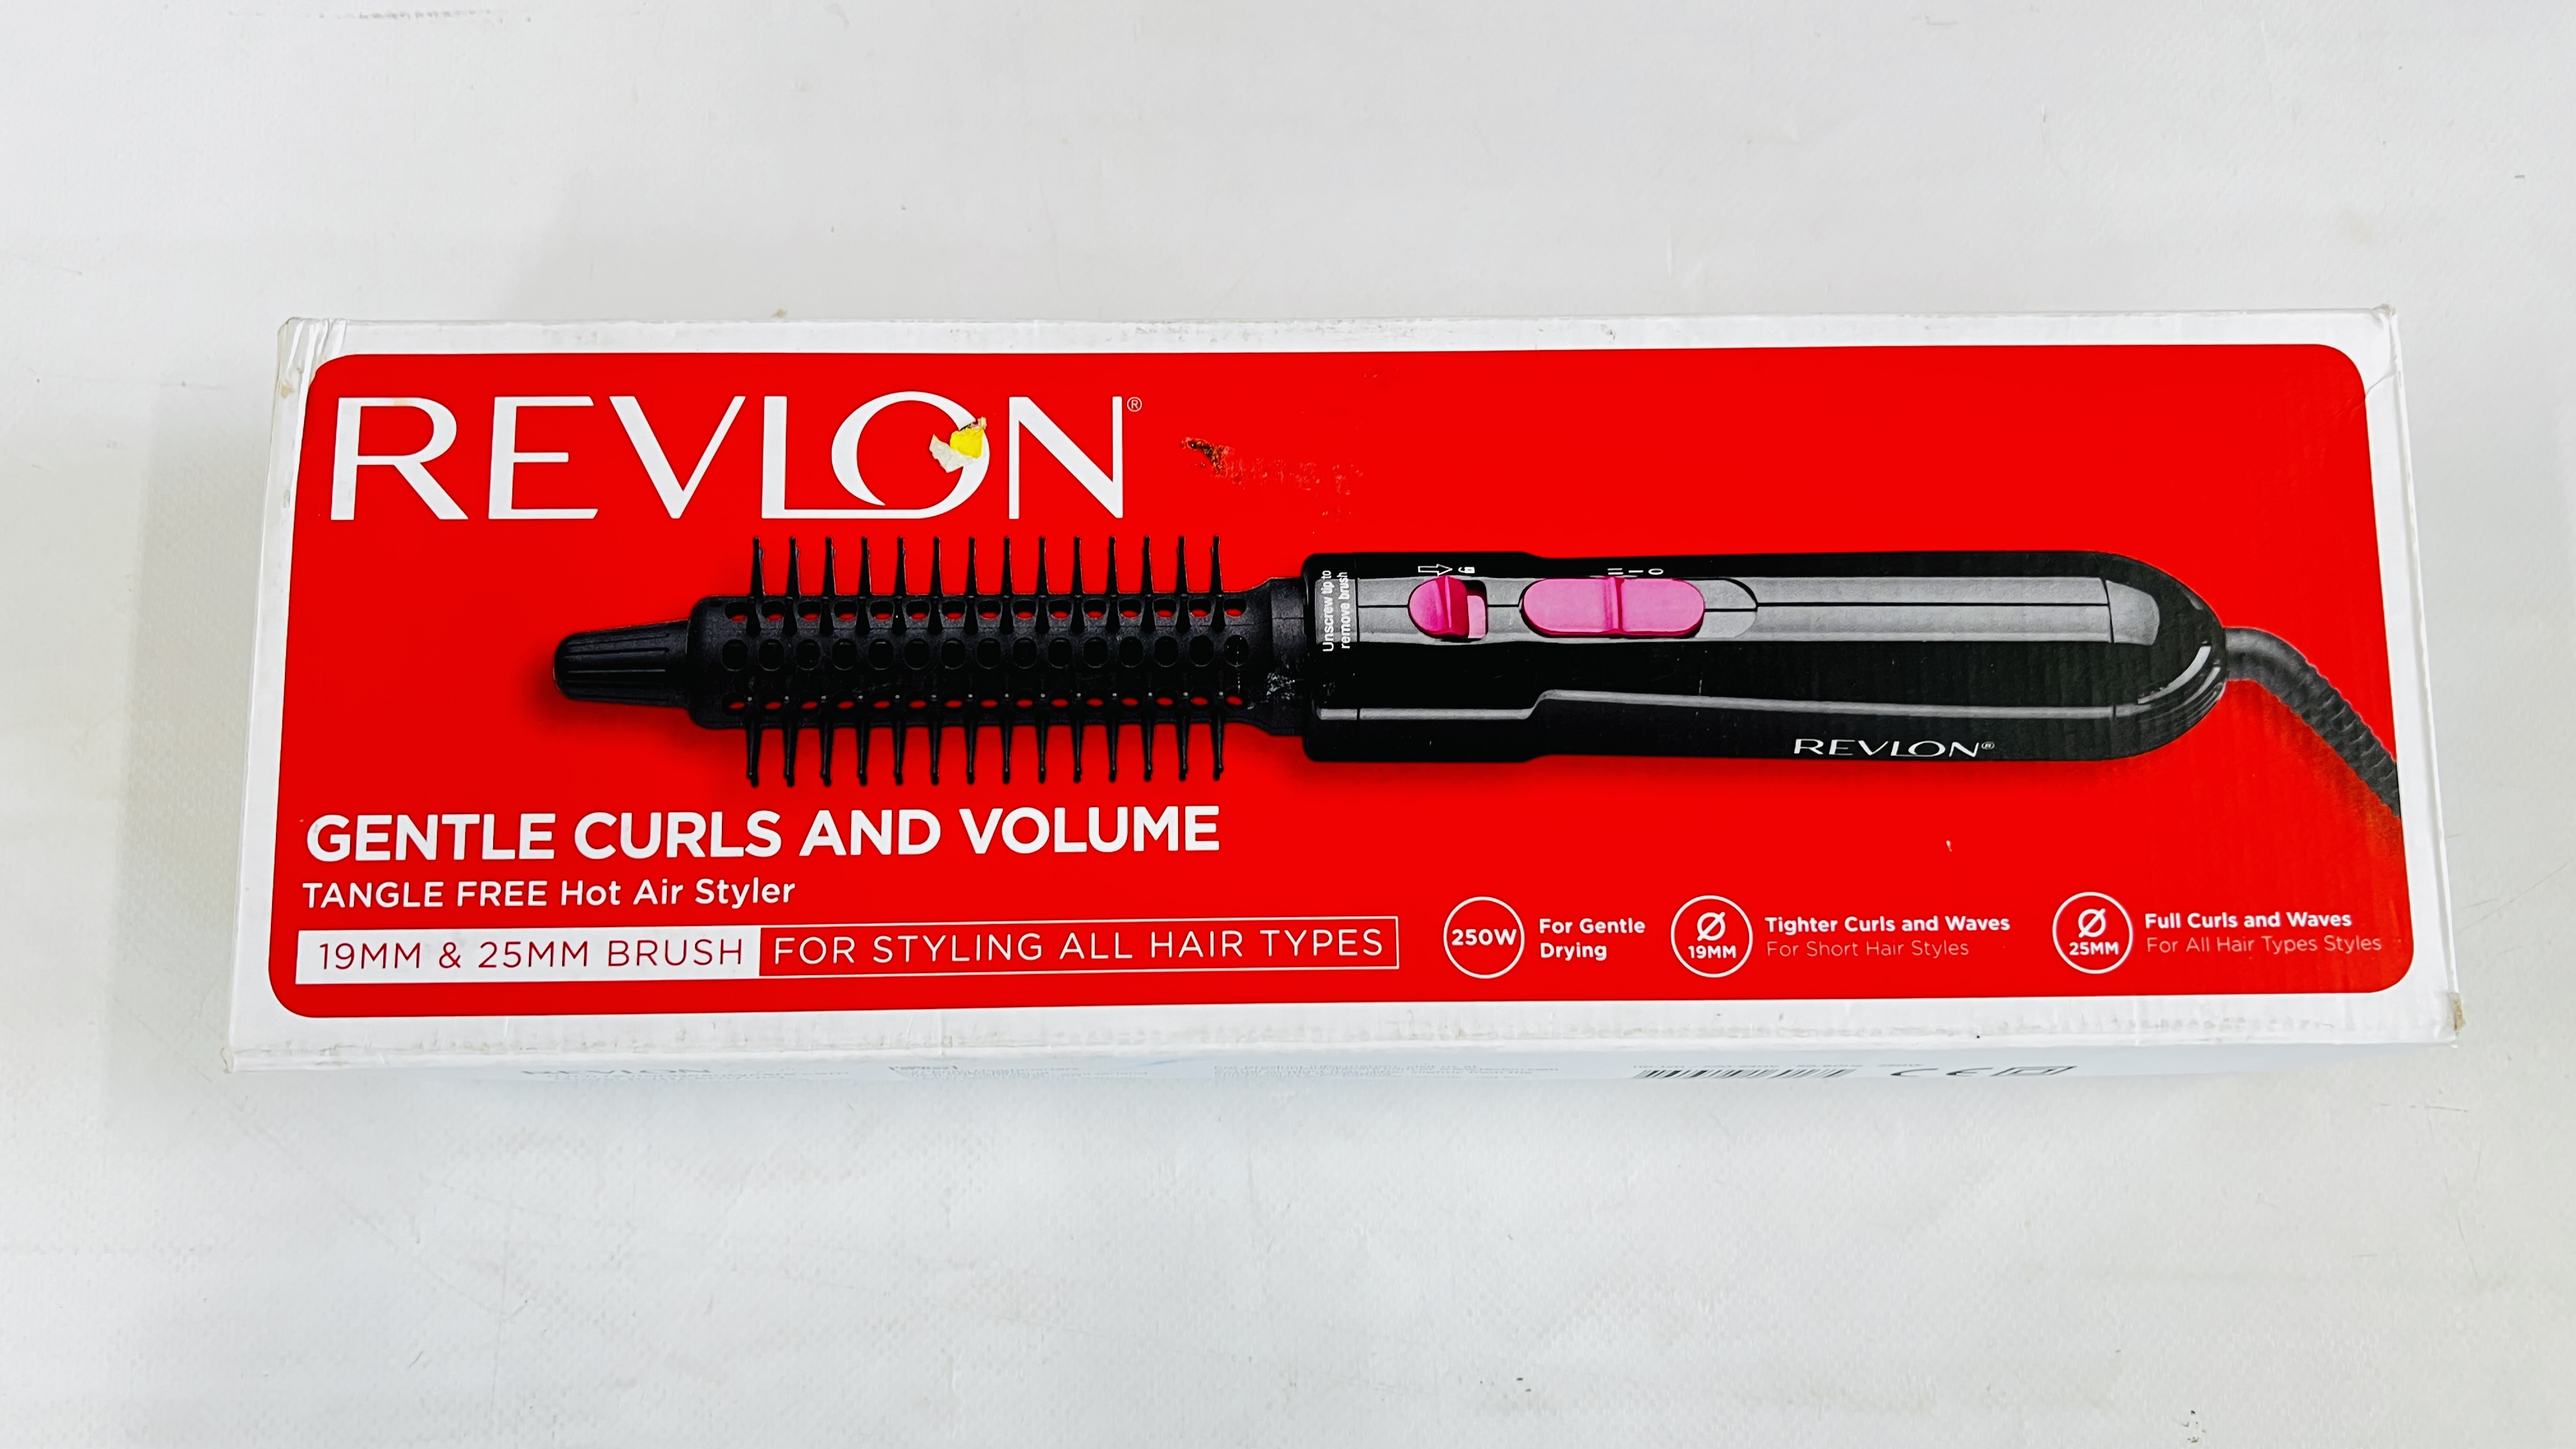 6 X REVLON TANGLE FREE HOT AIR STYLERS BOXED - SOLD AS SEEN. - Image 2 of 4